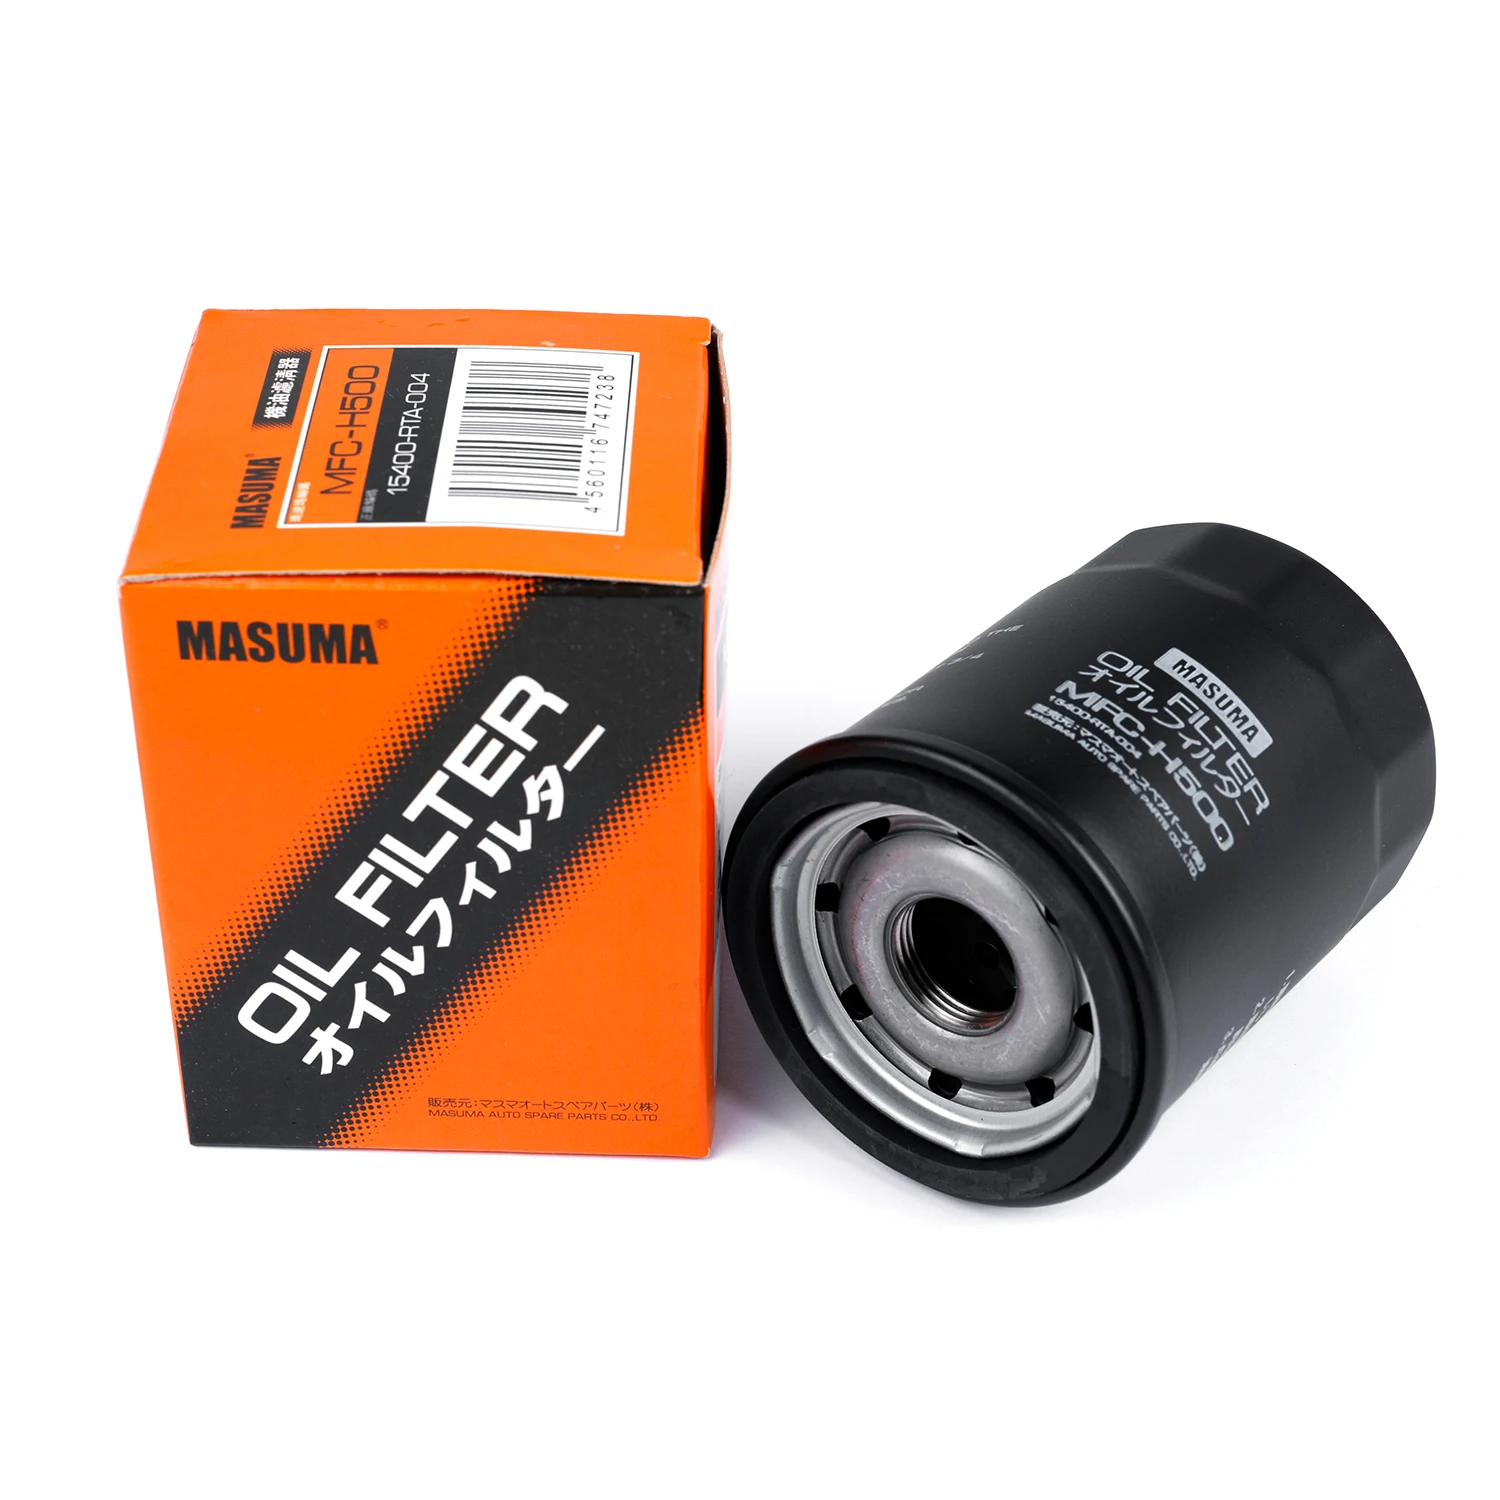 Mfc-h500 Masuma Auto Engine System Wearing Part Oil Filter 15400-rta-004  For Toyota - Buy Wearing Part Oil Filter, thailand Wearing Part Oil Filter,  wearing Part Oil Filter For Professional Product 